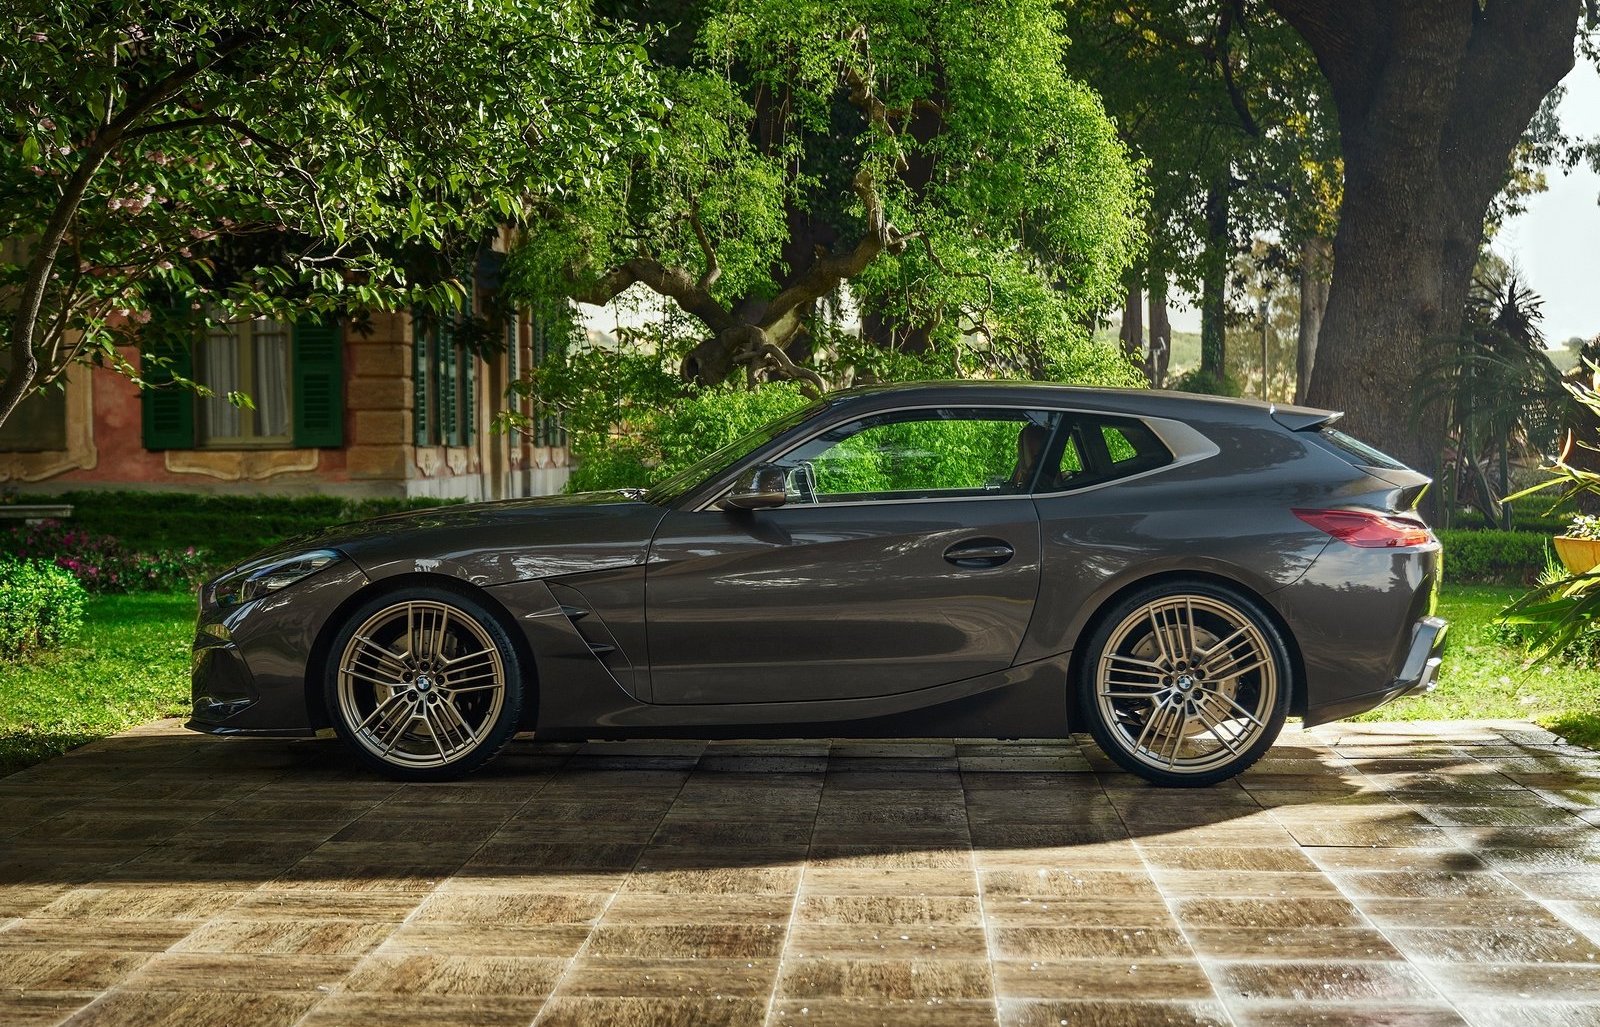 BMW unveils stunning Touring Coupe Concept at Concorso d’Eleganza